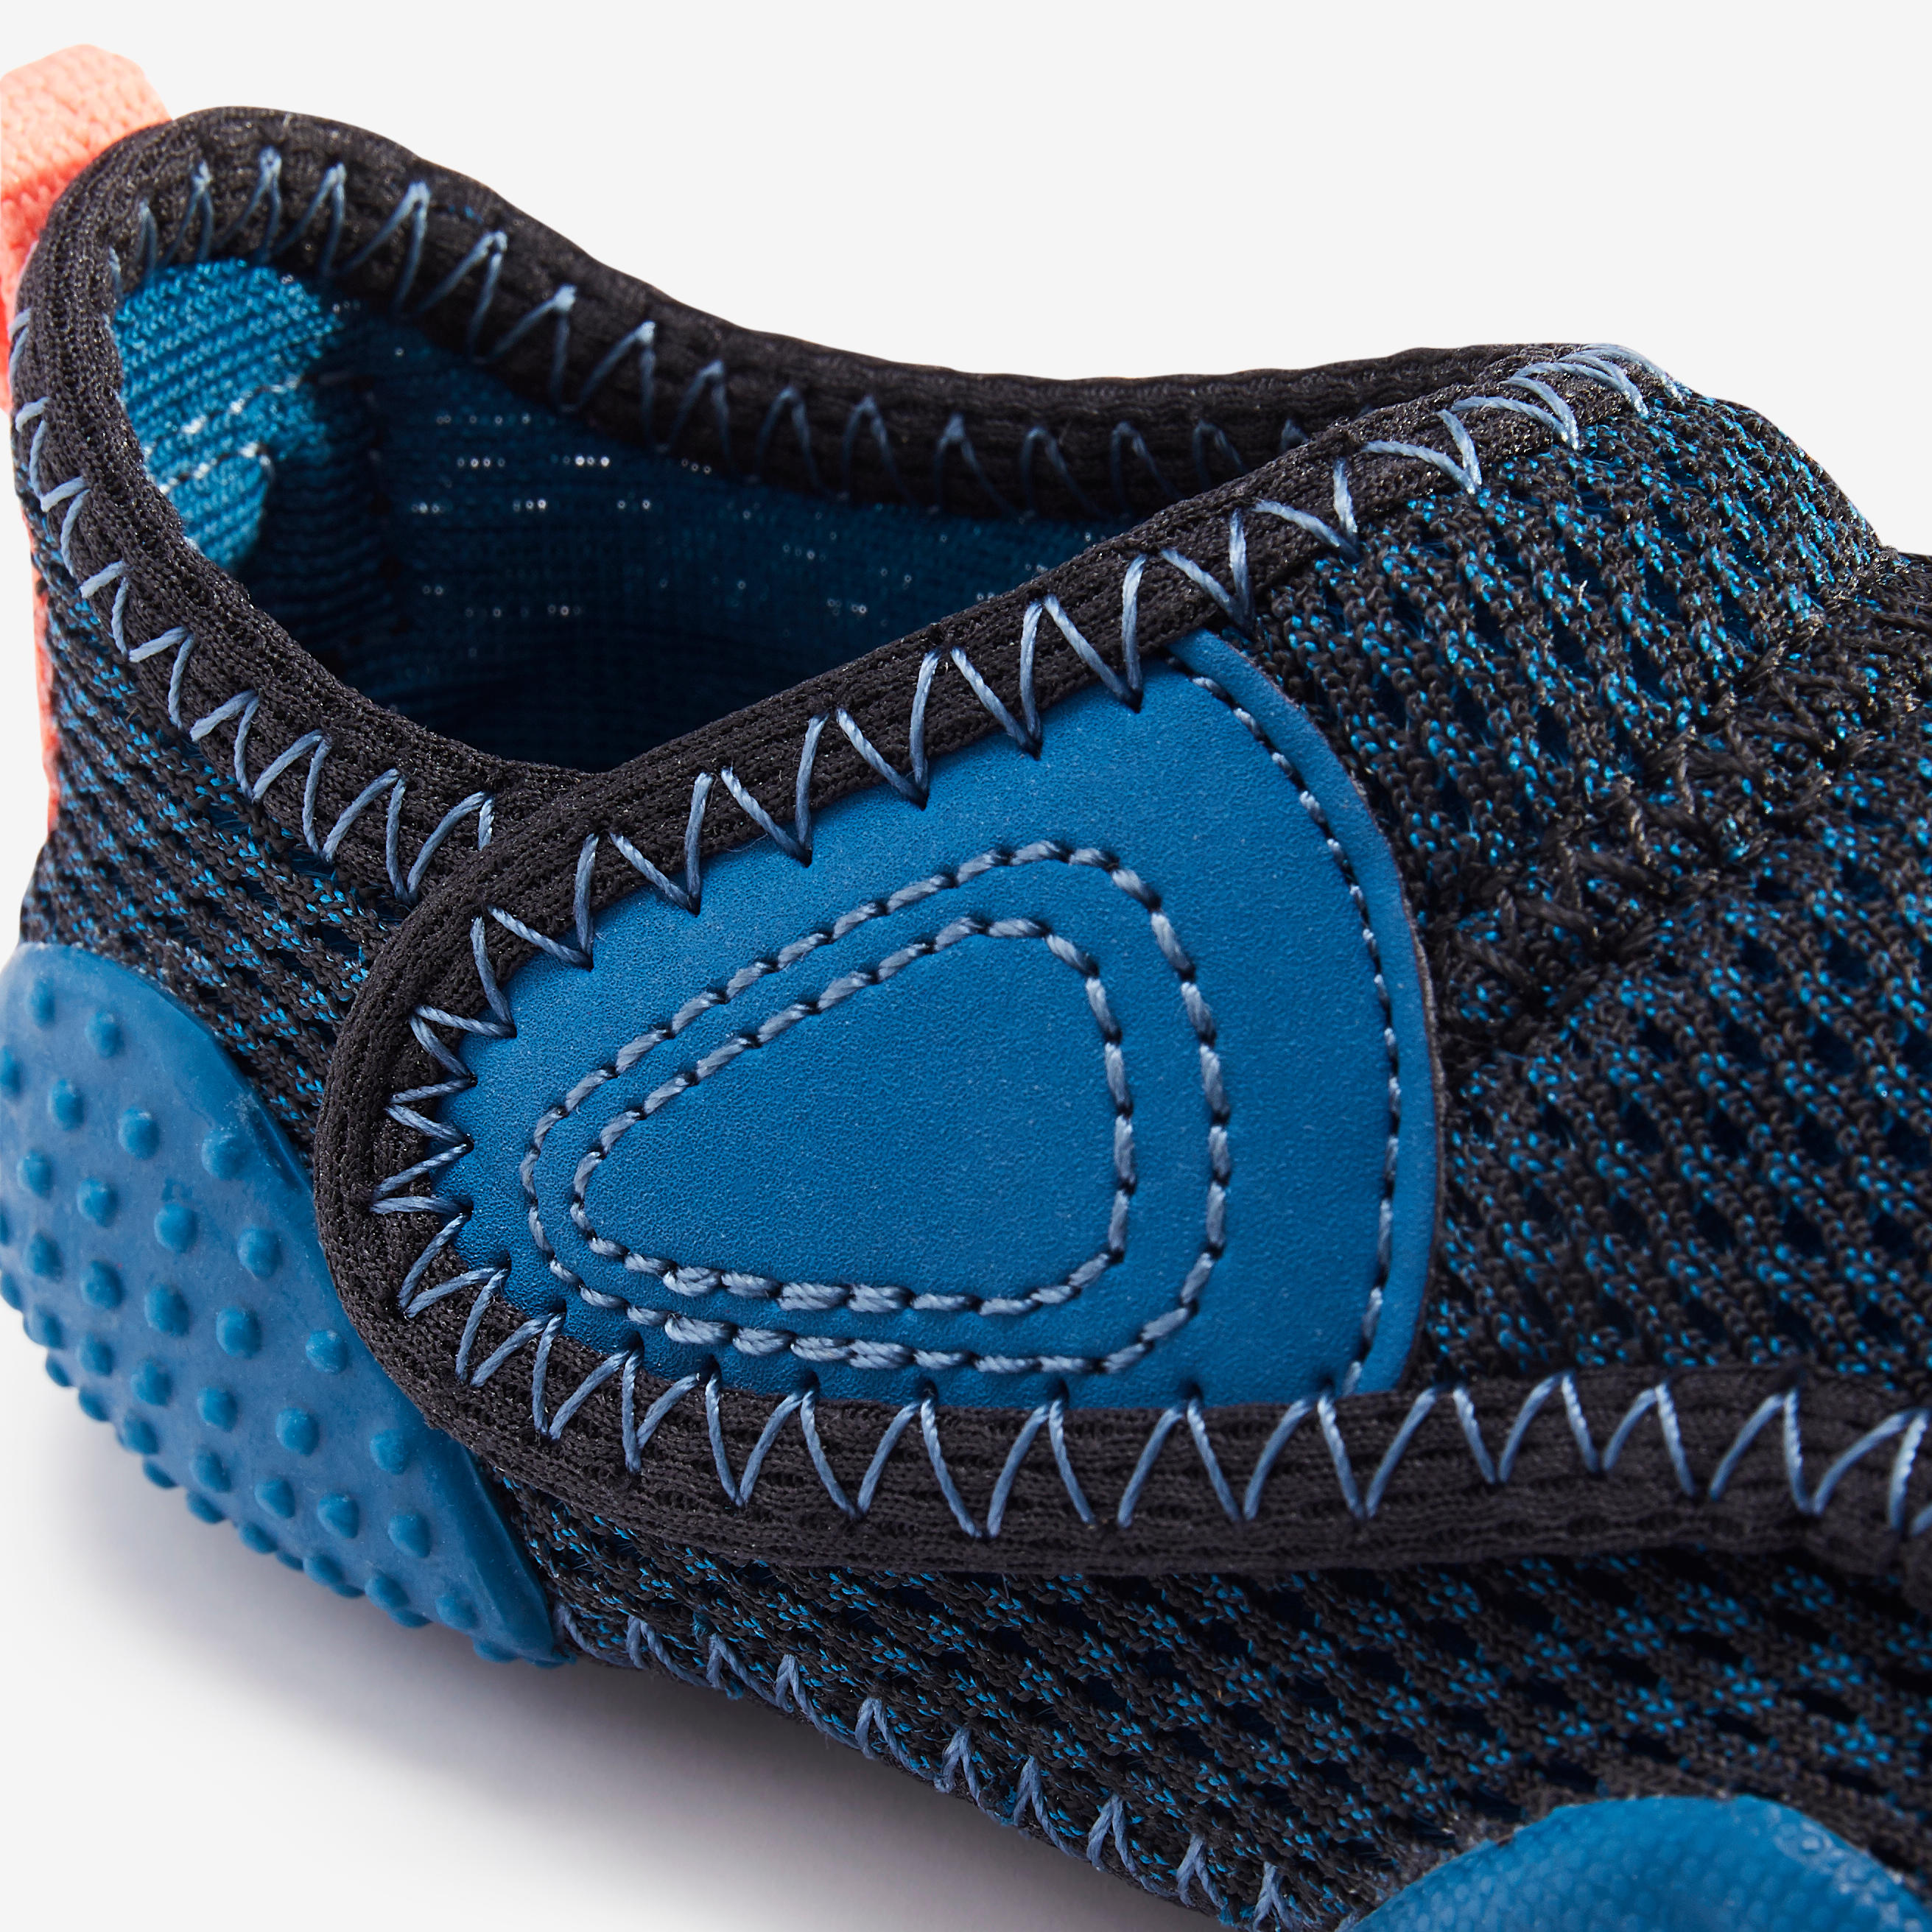 Kids' Non-Slip and Breathable Bootee - Blue 7/8